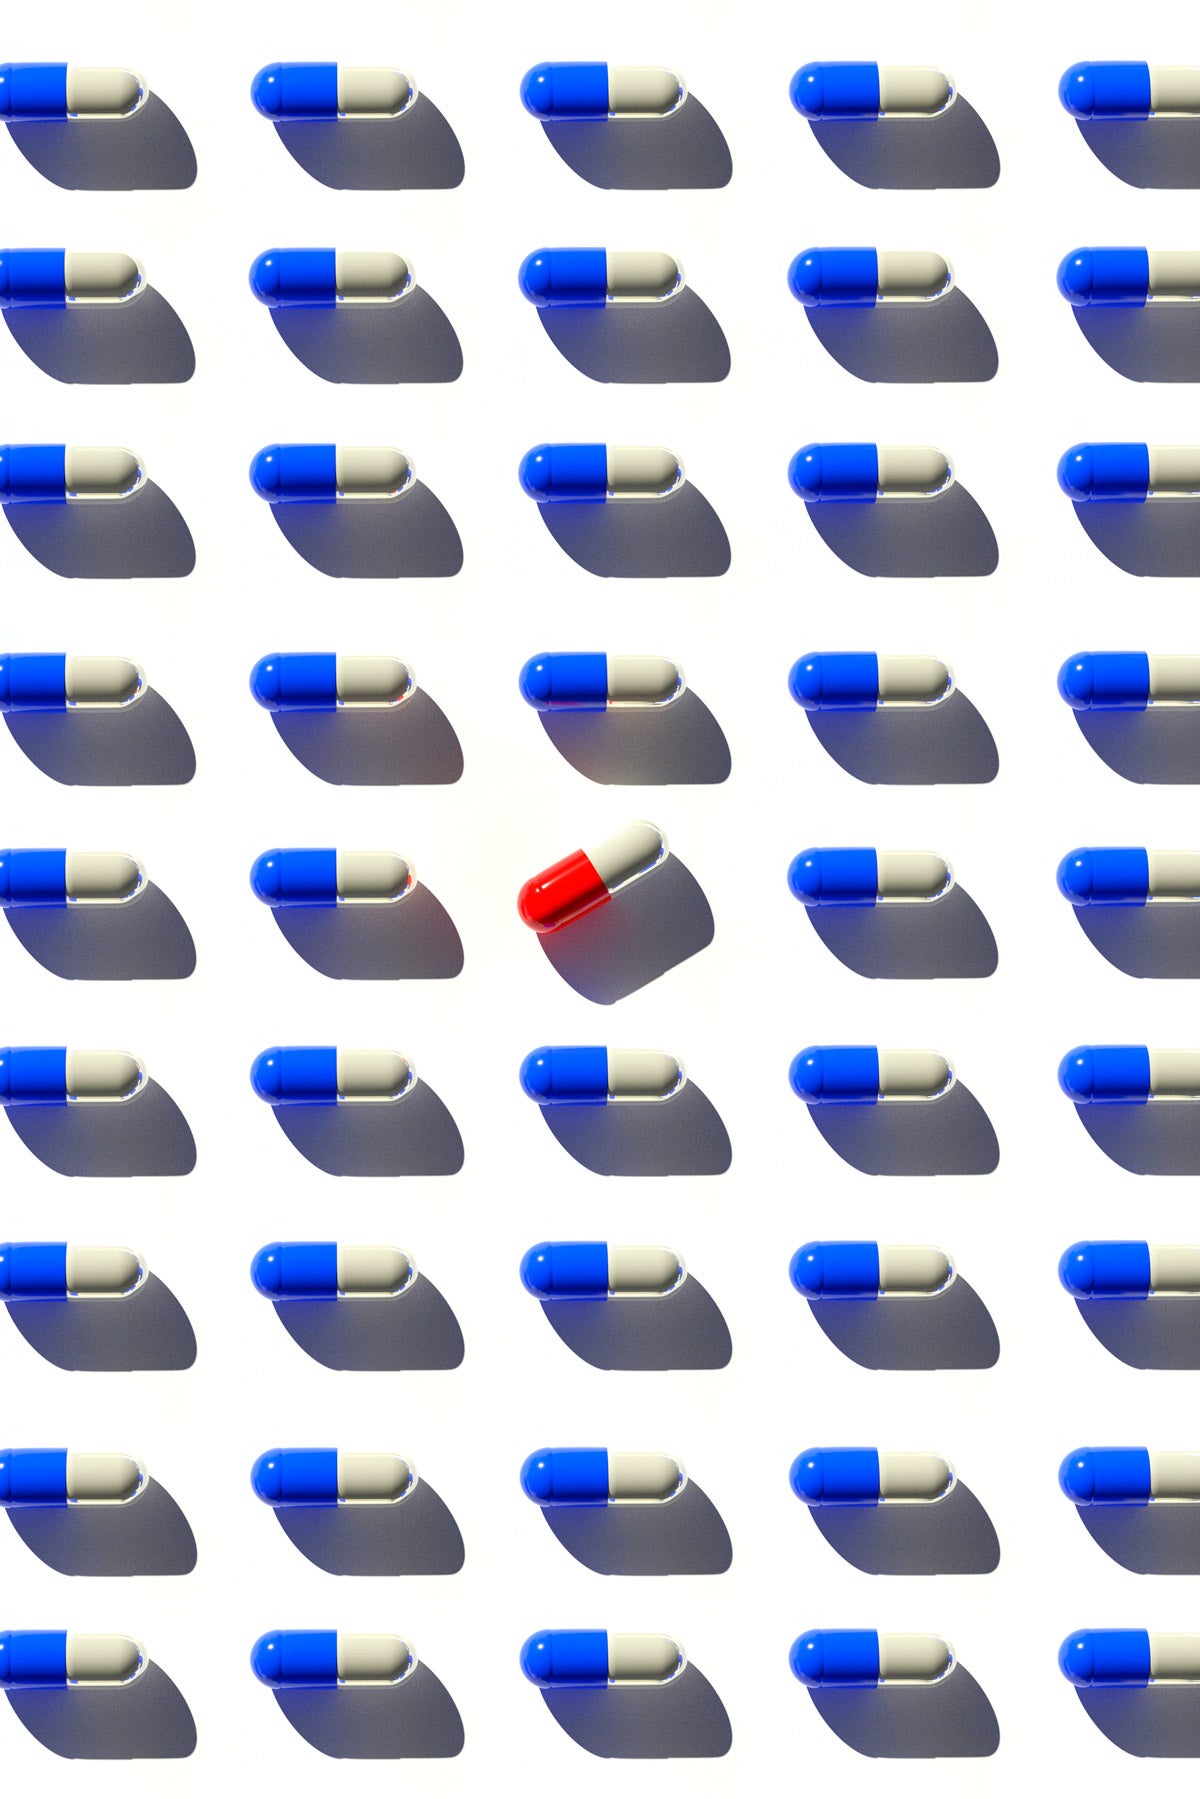 Organized rows of white and blue pill capsules. A white and red pill is in the center and turned 45 degrees.